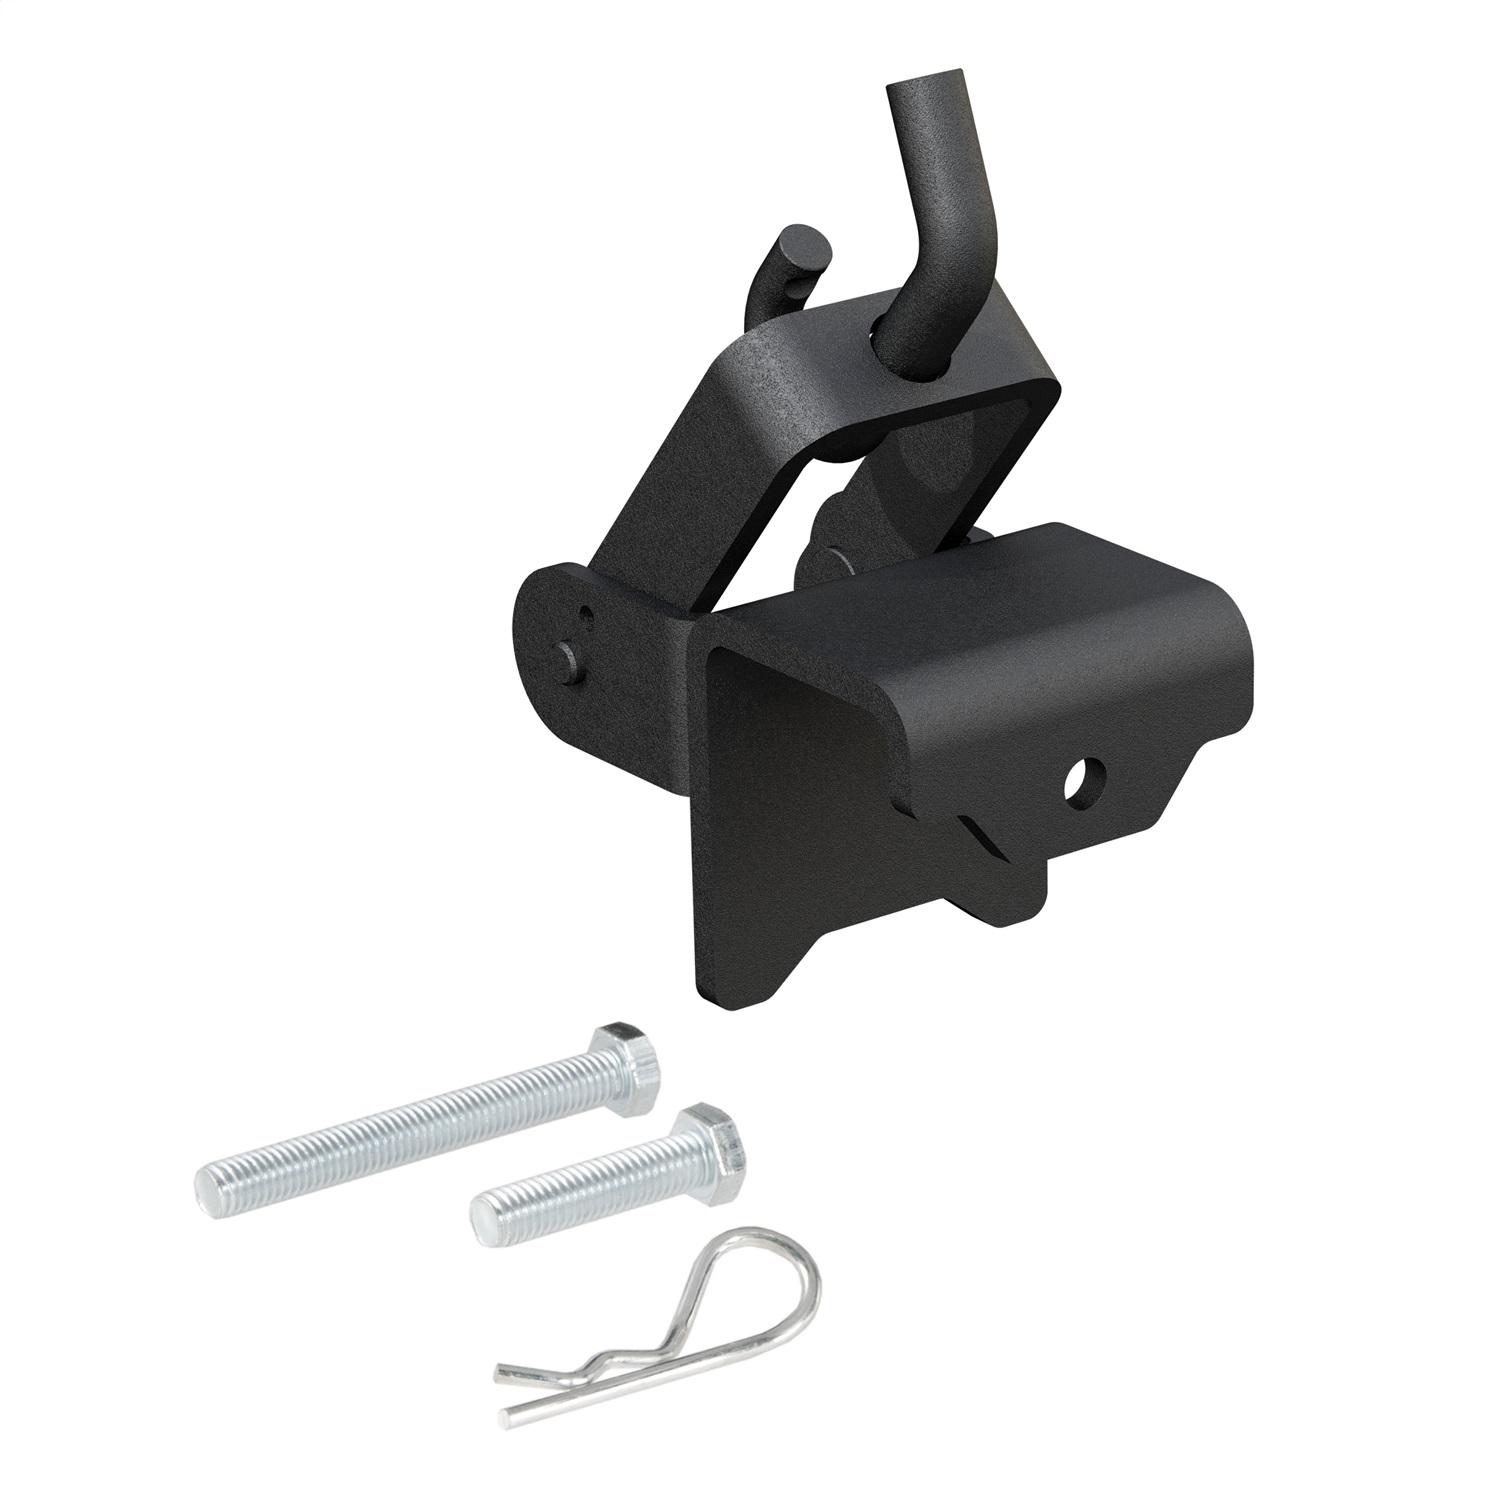 CURT Manufacturing CURT Manufacturing 17008 Weight Distribution Hitch Hook-Up Bracket  Fits